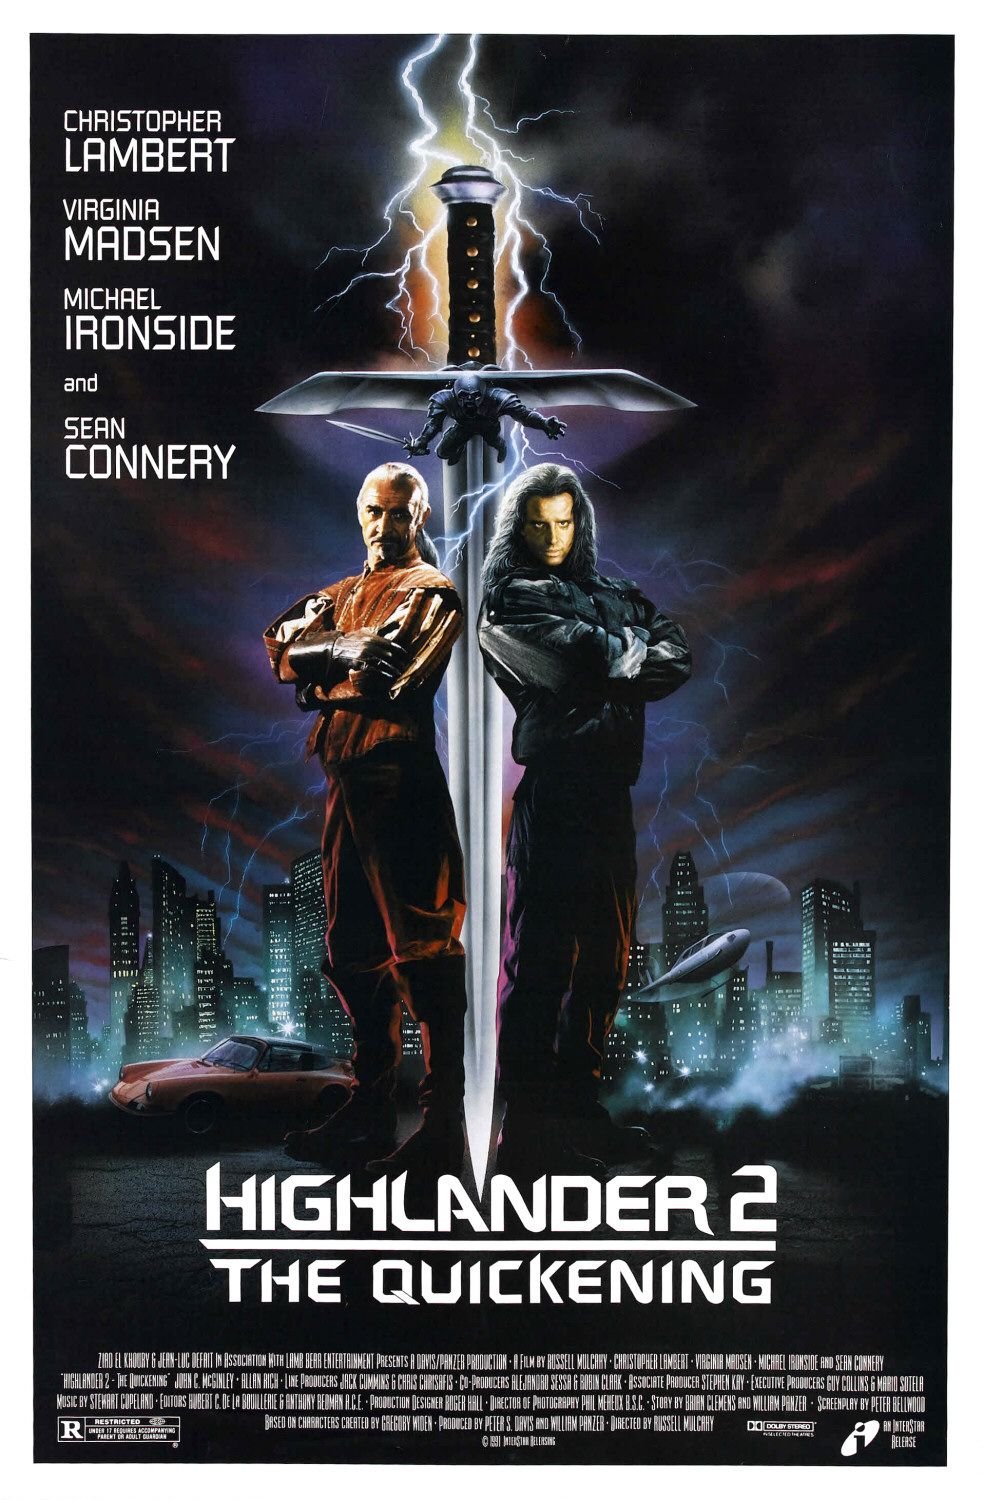 Poster of the movie Highlander 2: The Quickening